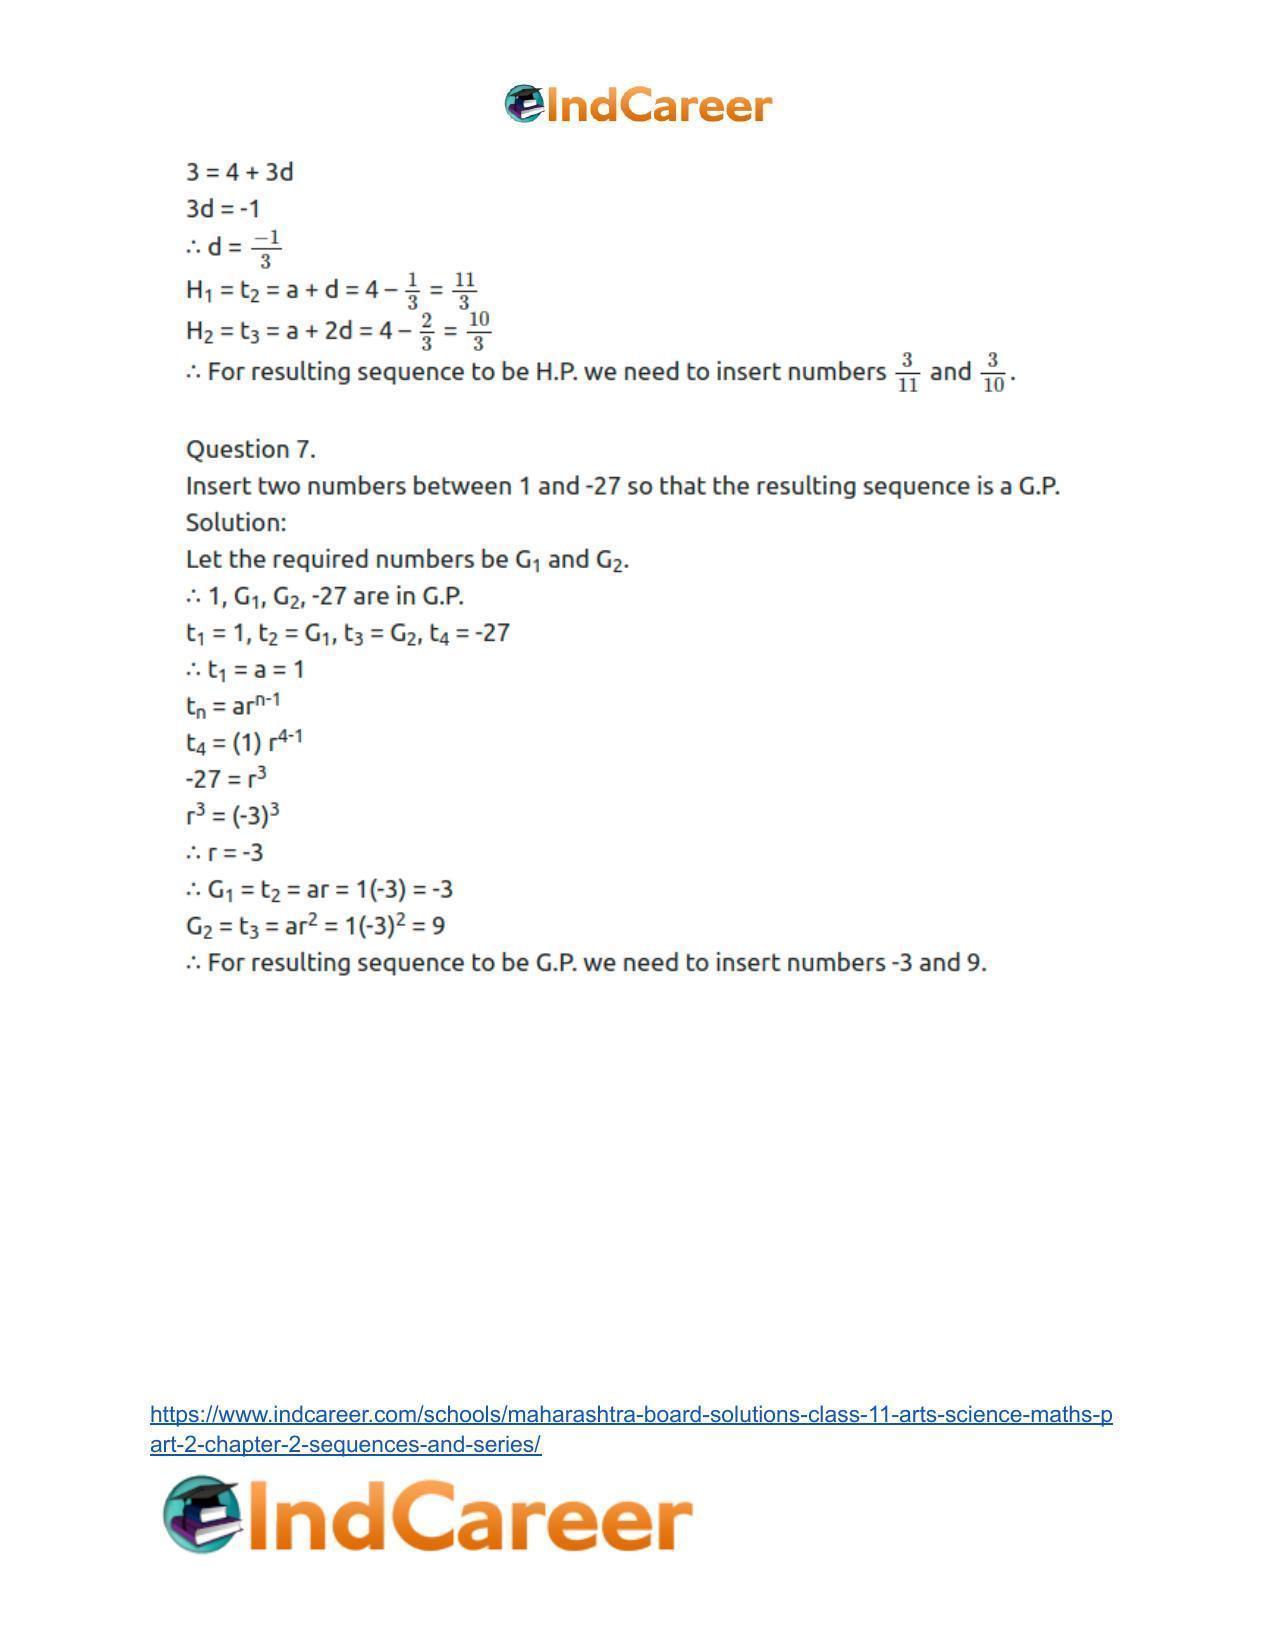 Maharashtra Board Solutions Class 11-Arts & Science Maths (Part 2): Chapter 2- Sequences and Series - Page 56